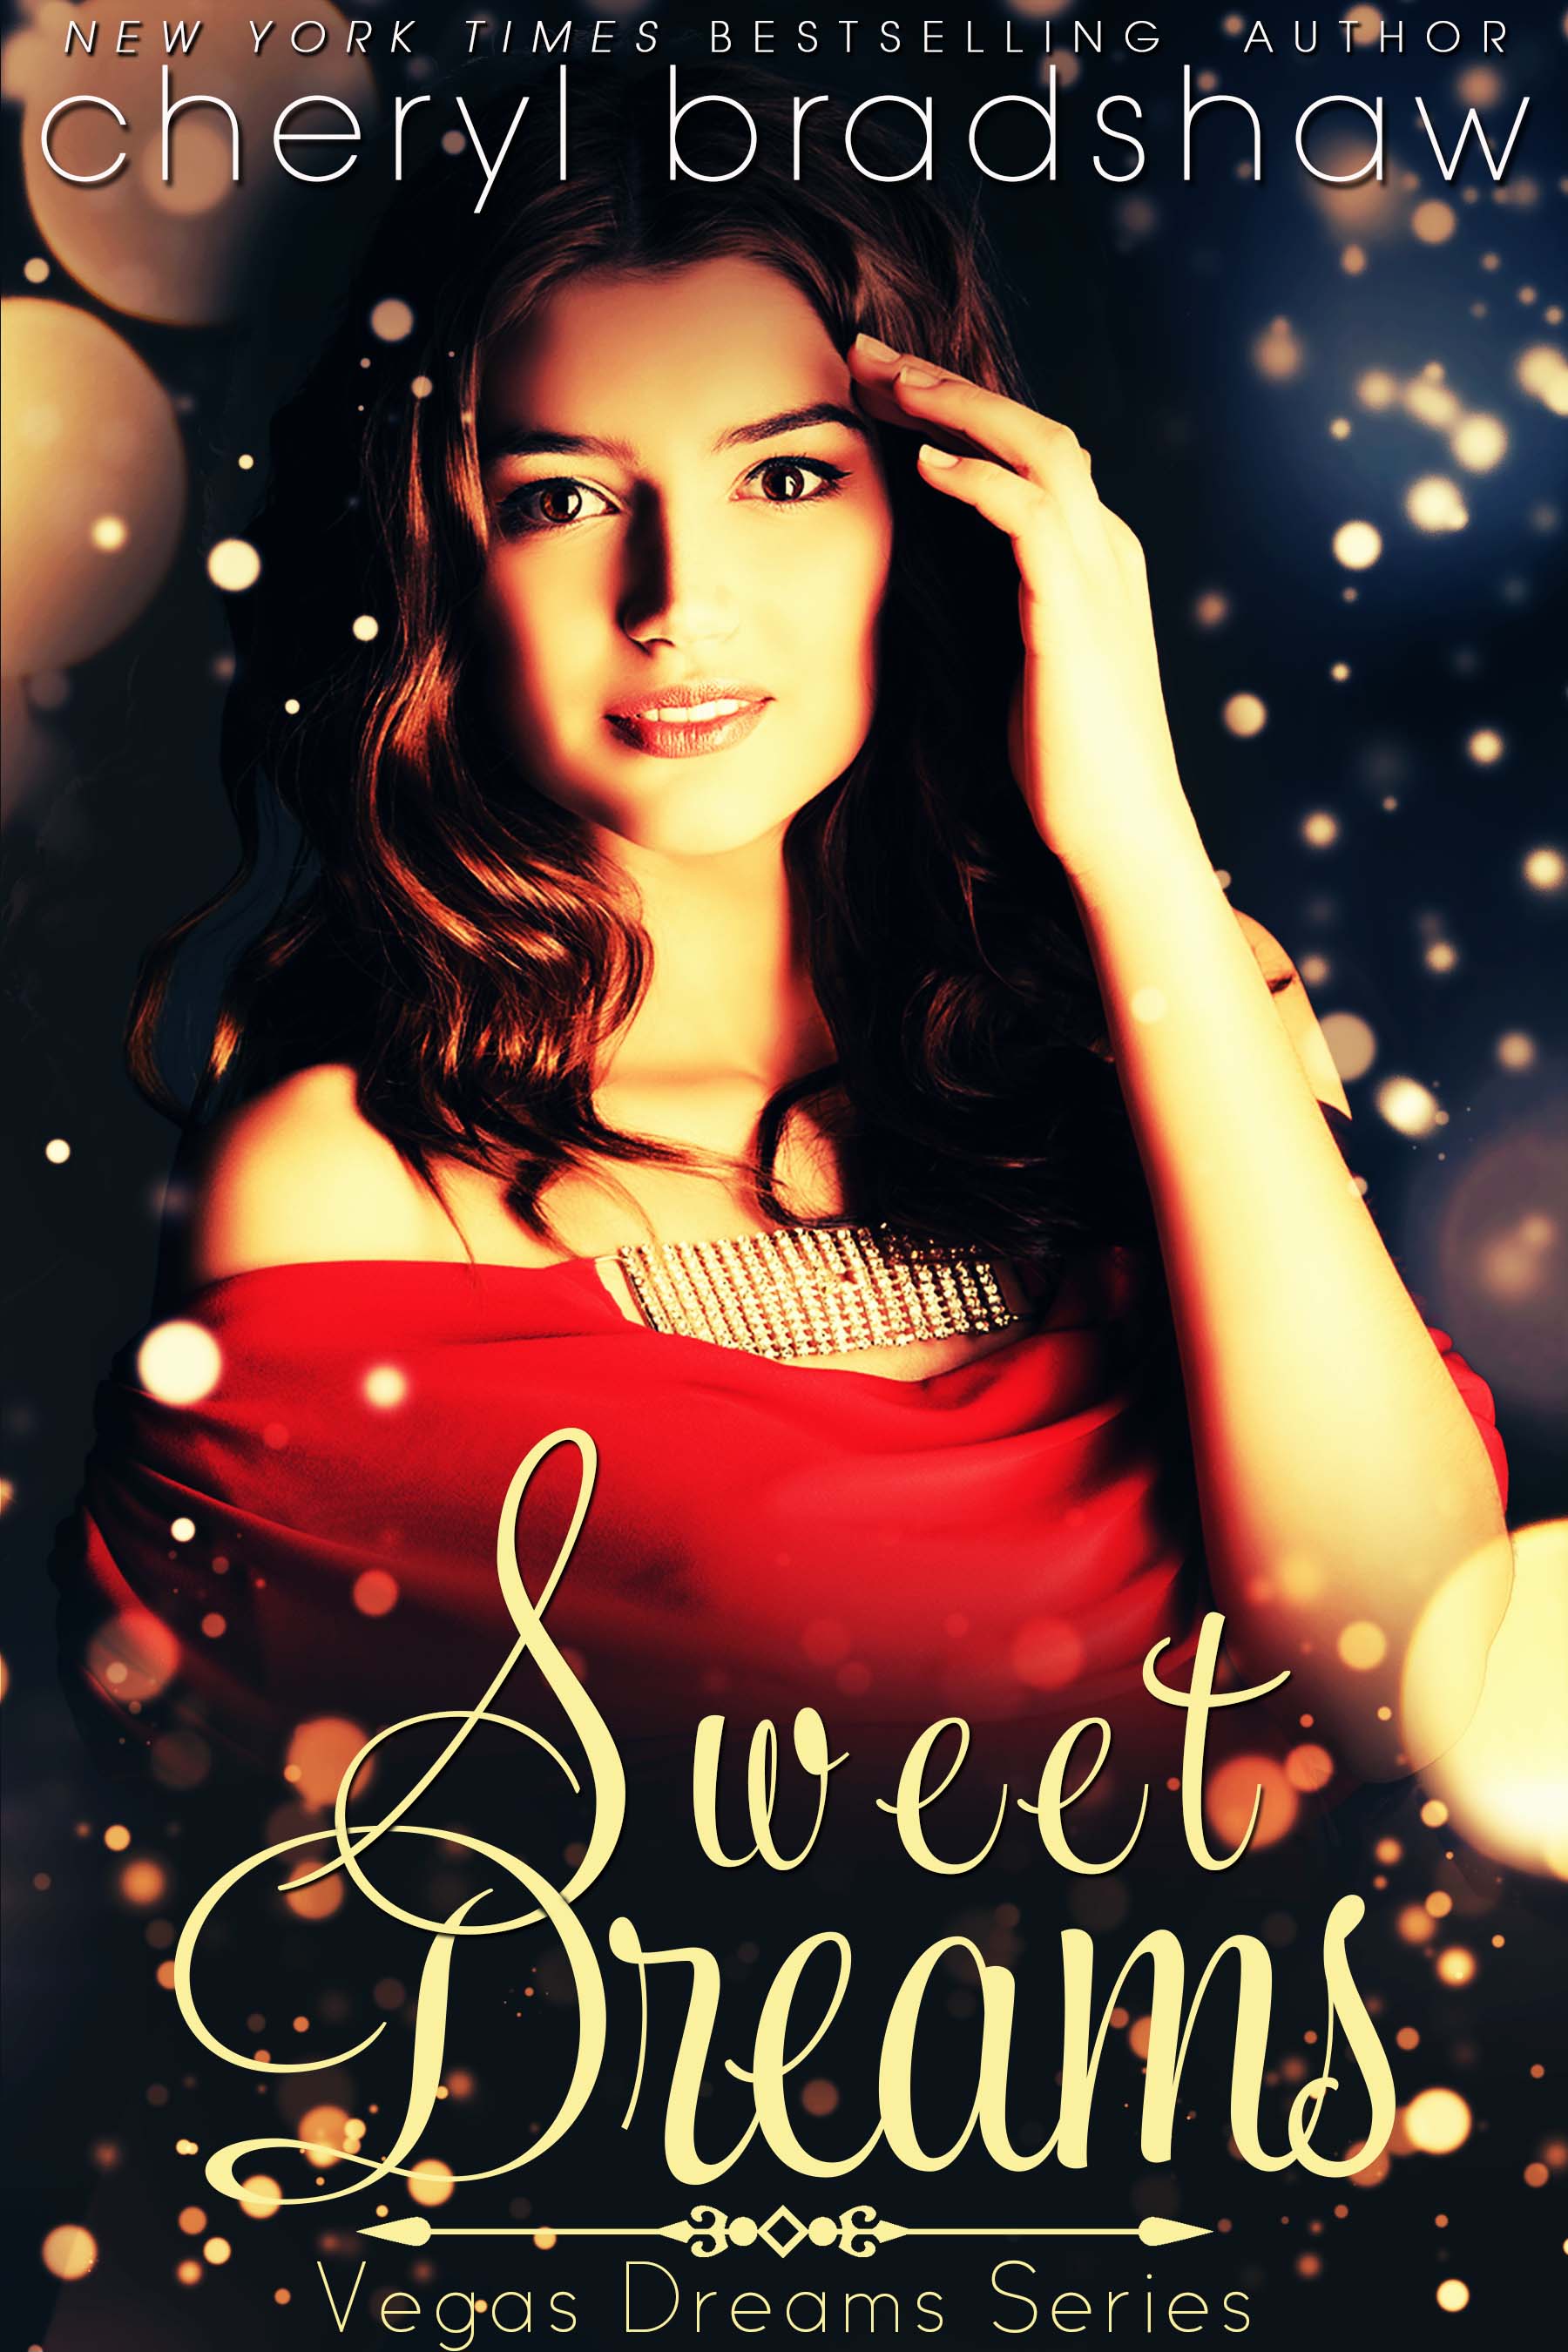 Sweet Dreams by Cheryl Bradshaw New York Times bestselling author